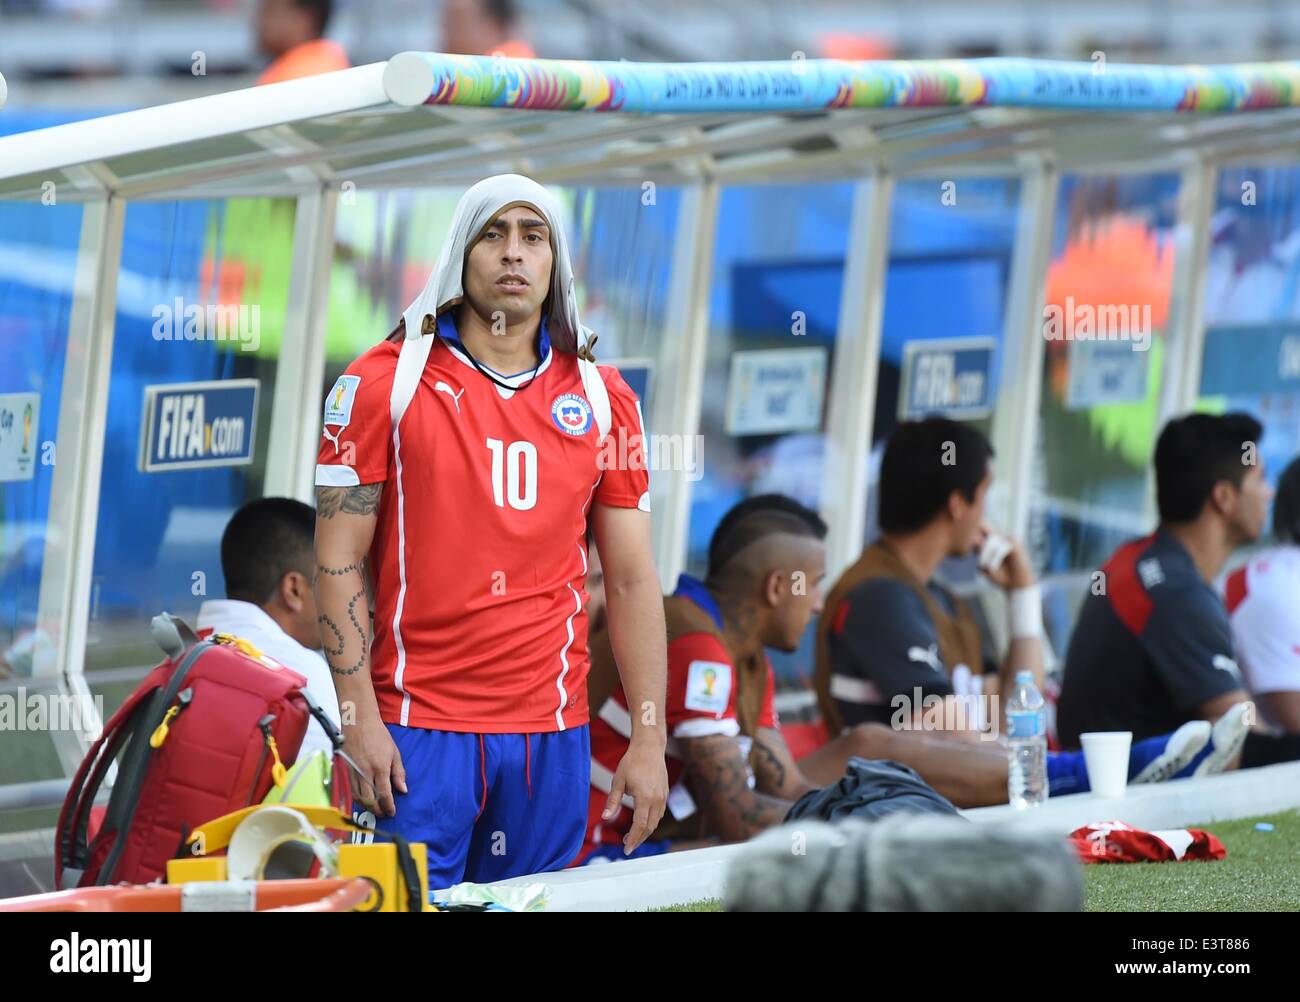 Belo Horizonte, Brazil. 28th June, 2014. Chile's Jorge Valdivia reacts during a Round of 16 match between Brazil and Chile of 2014 FIFA World Cup at the Estadio Mineirao Stadium in Belo Horizonte, Brazil, on June 28, 2014. Credit:  Liu Dawei/Xinhua/Alamy Live News Stock Photo